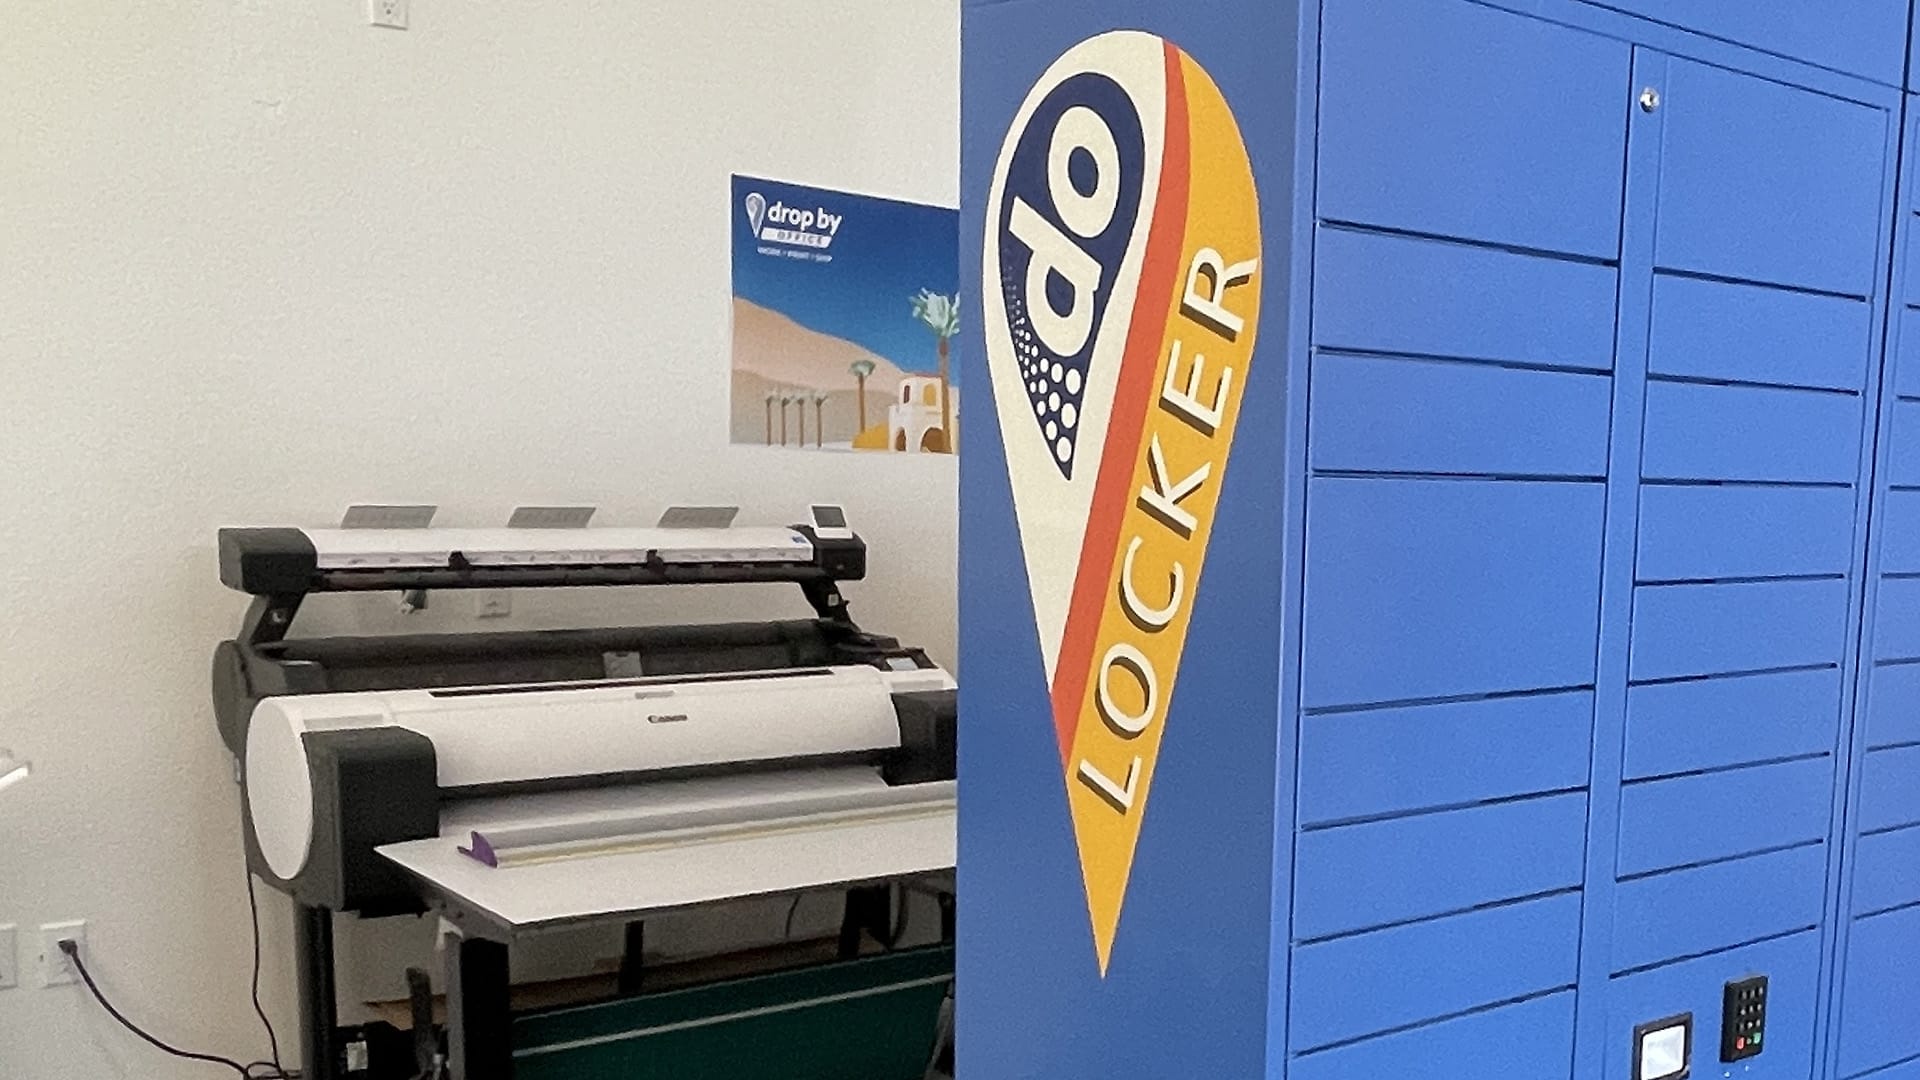 A photo of the Printer and Locker of DropBy Office
